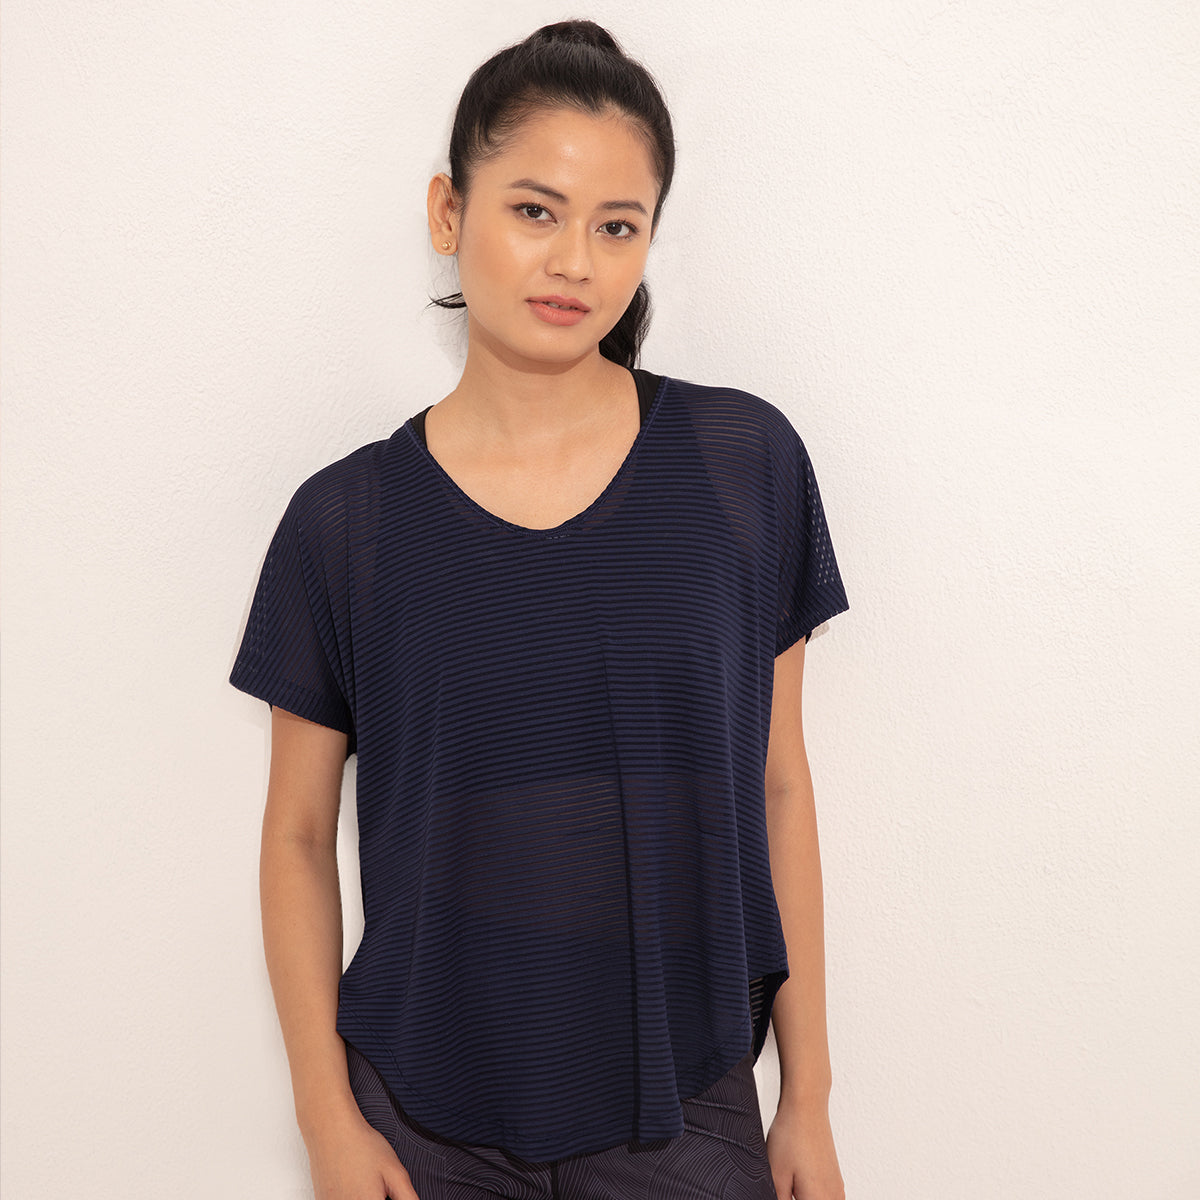 On-Trend Textured Top with Back Cutout -NYK232 Moonlight Ocean